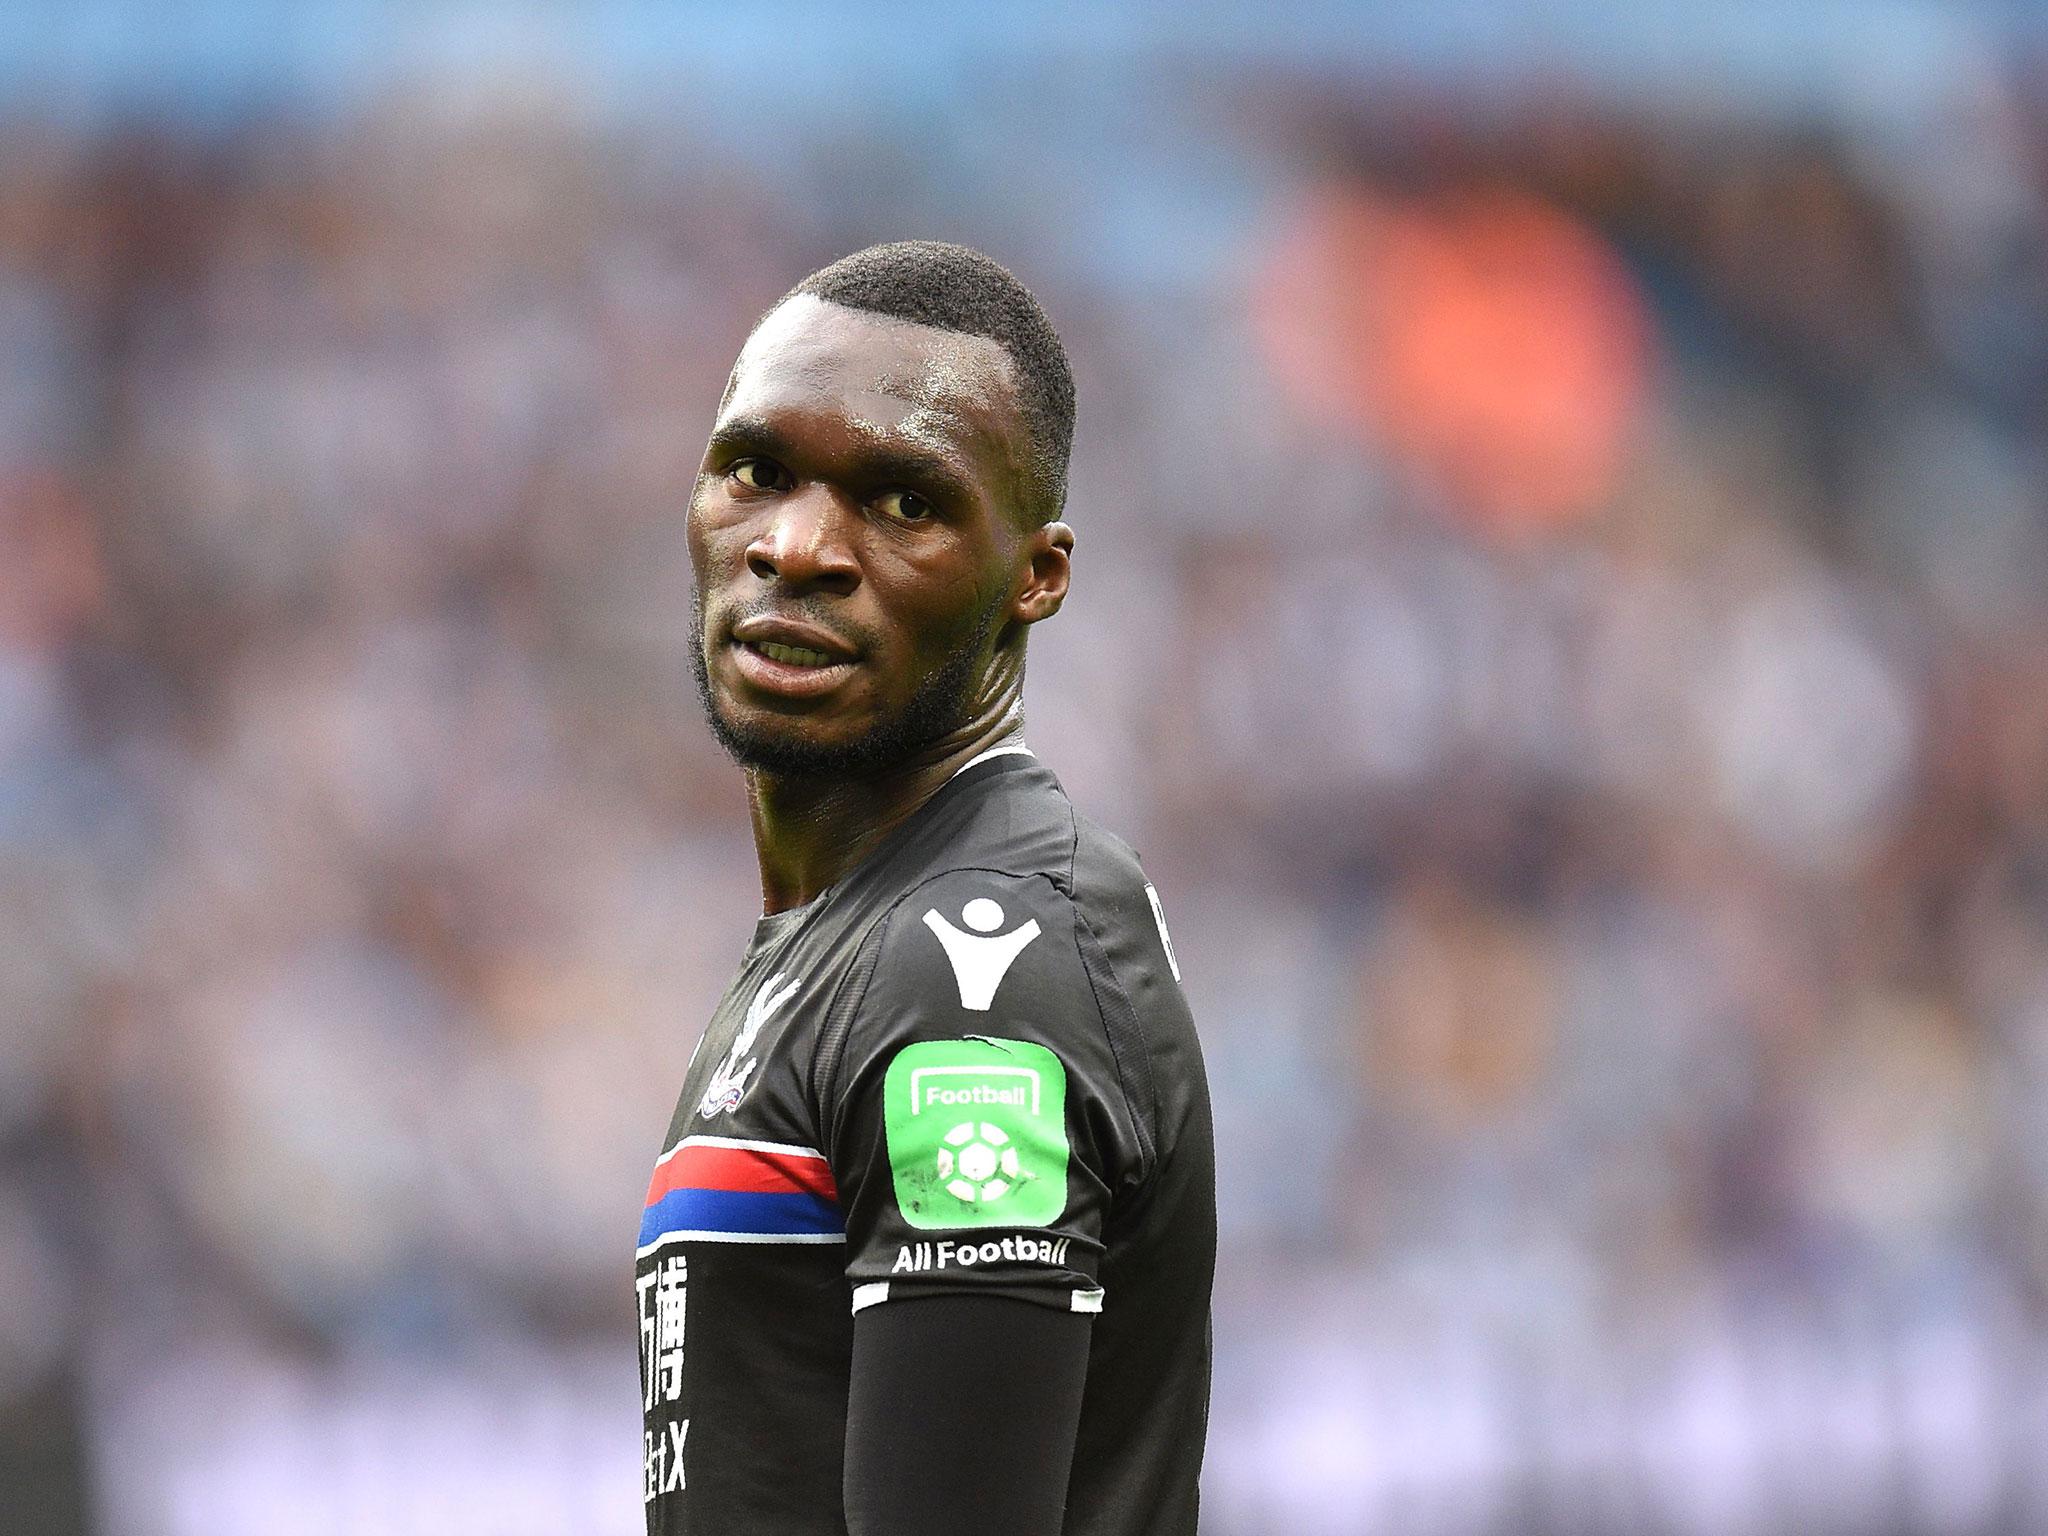 Christian Benteke is set to feature against Everton this weekend